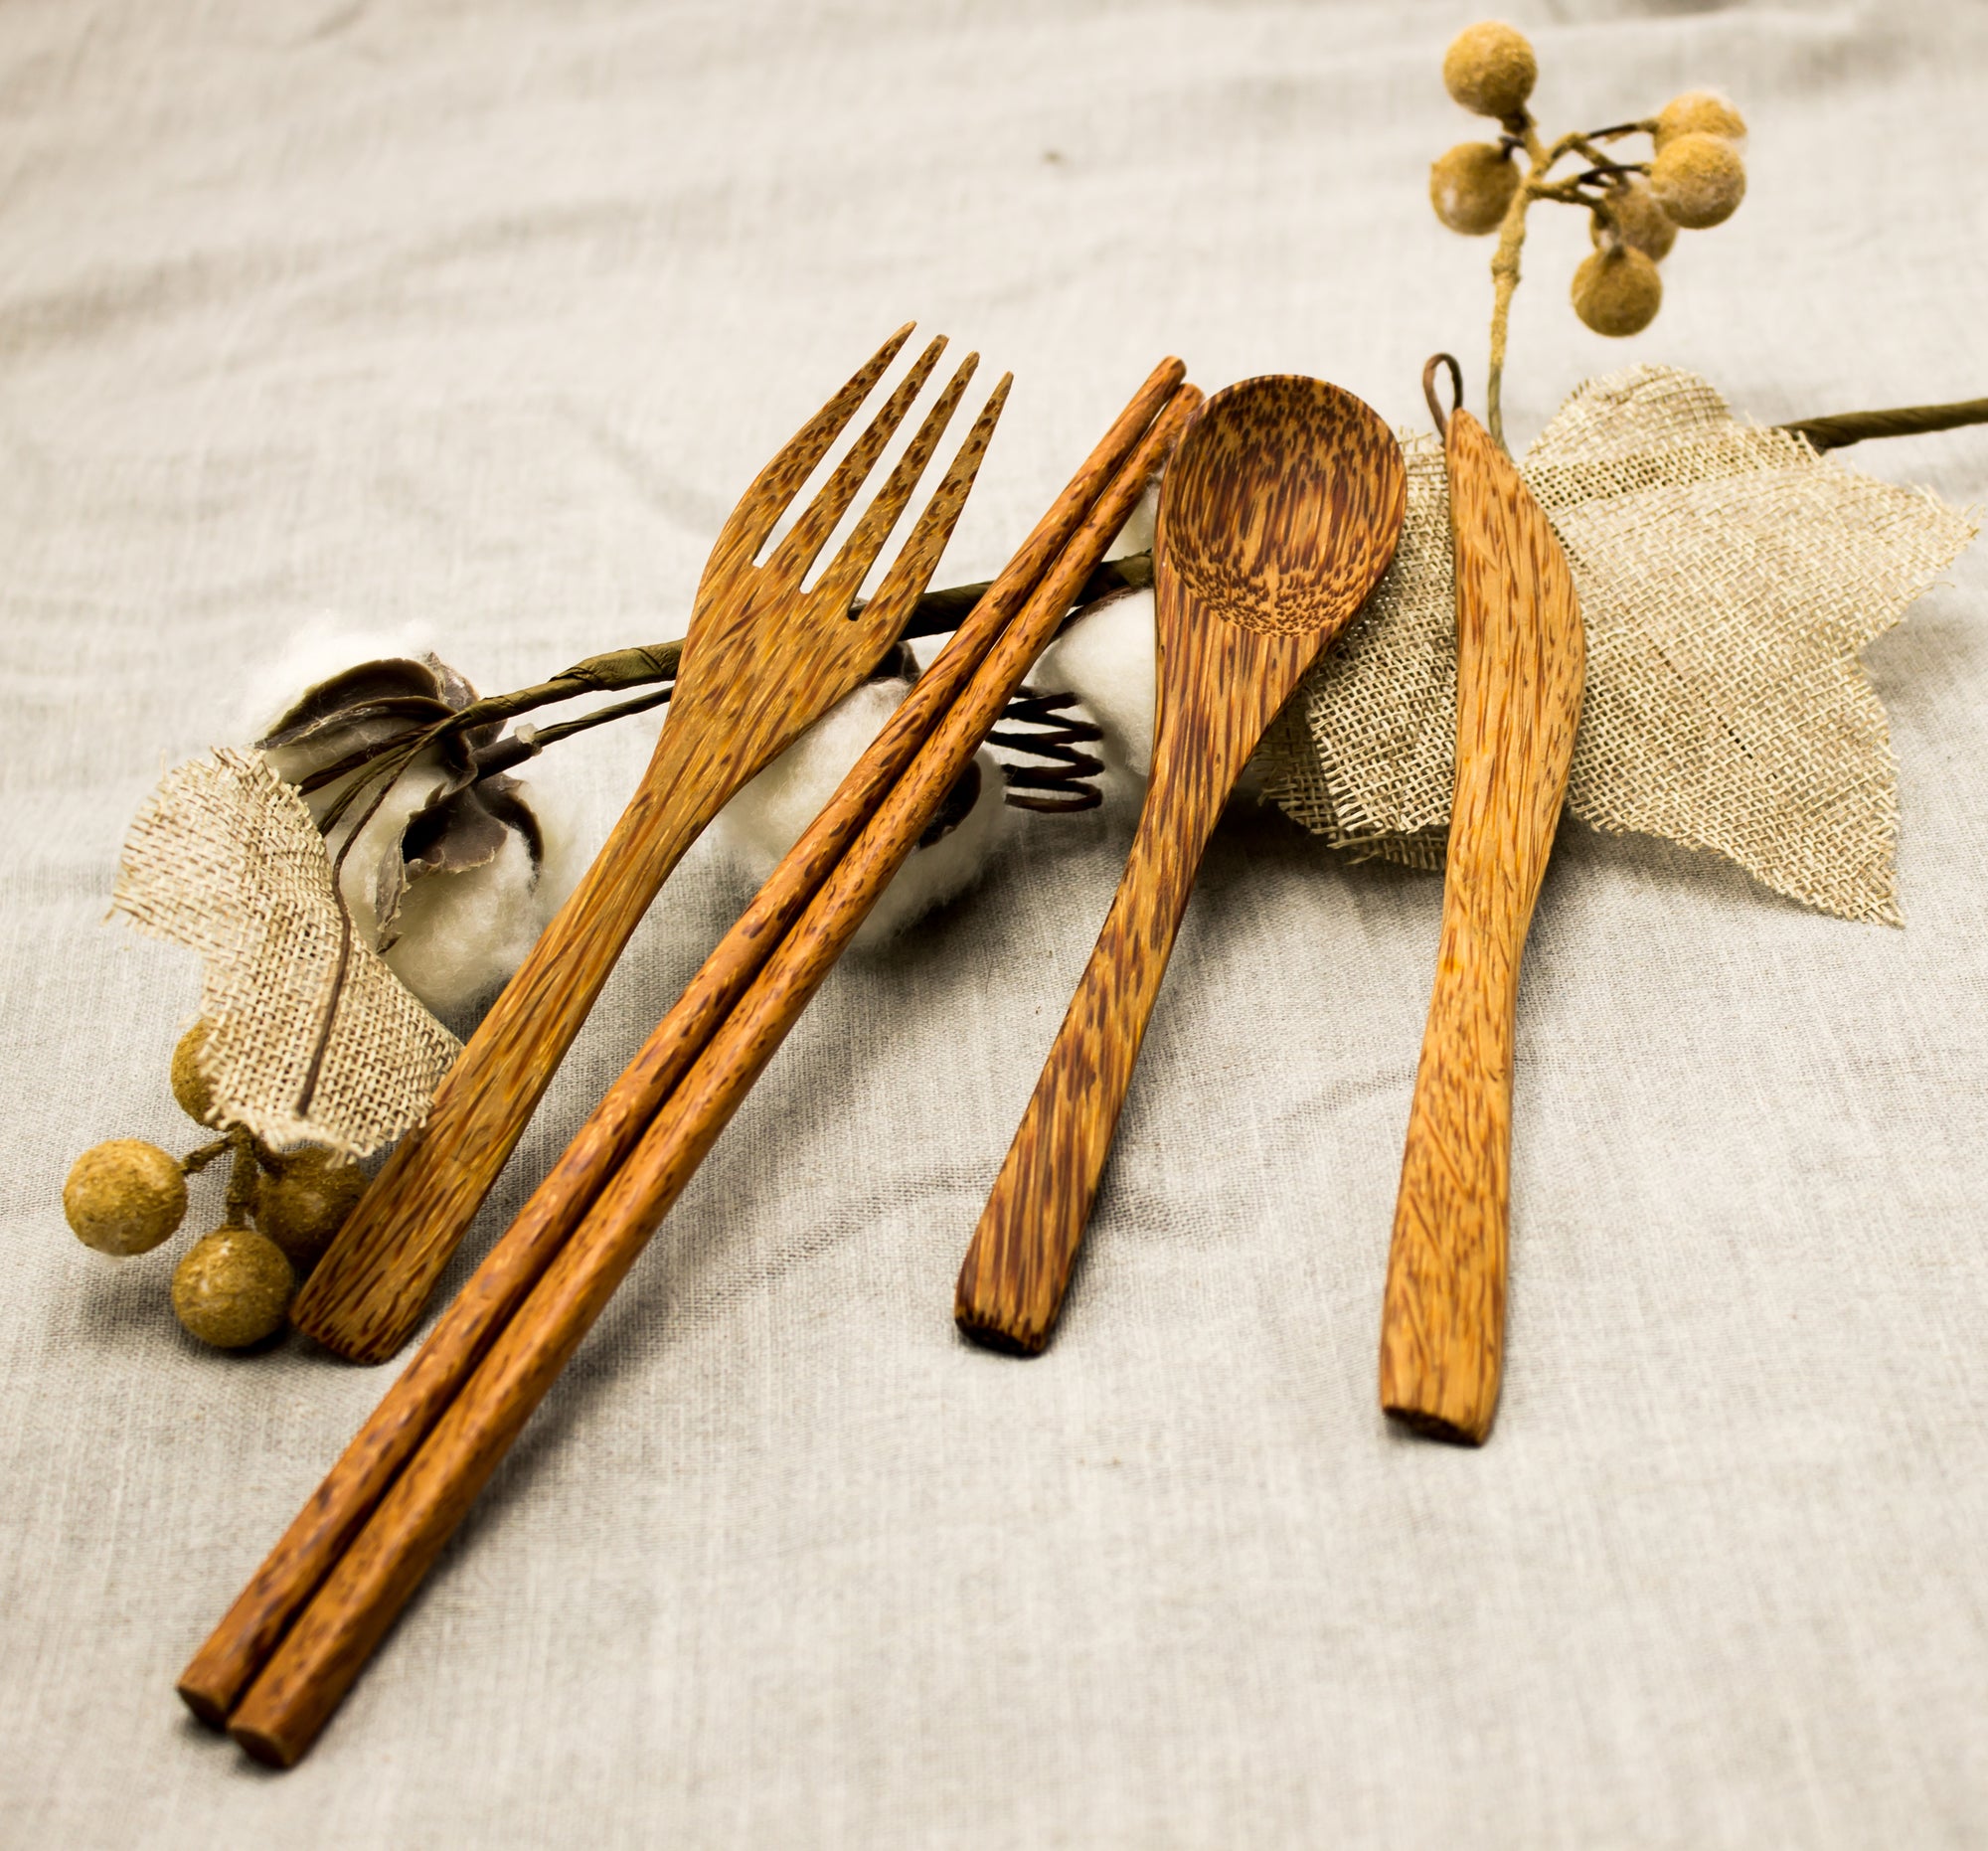 All natural hand crafted wooden utensils set